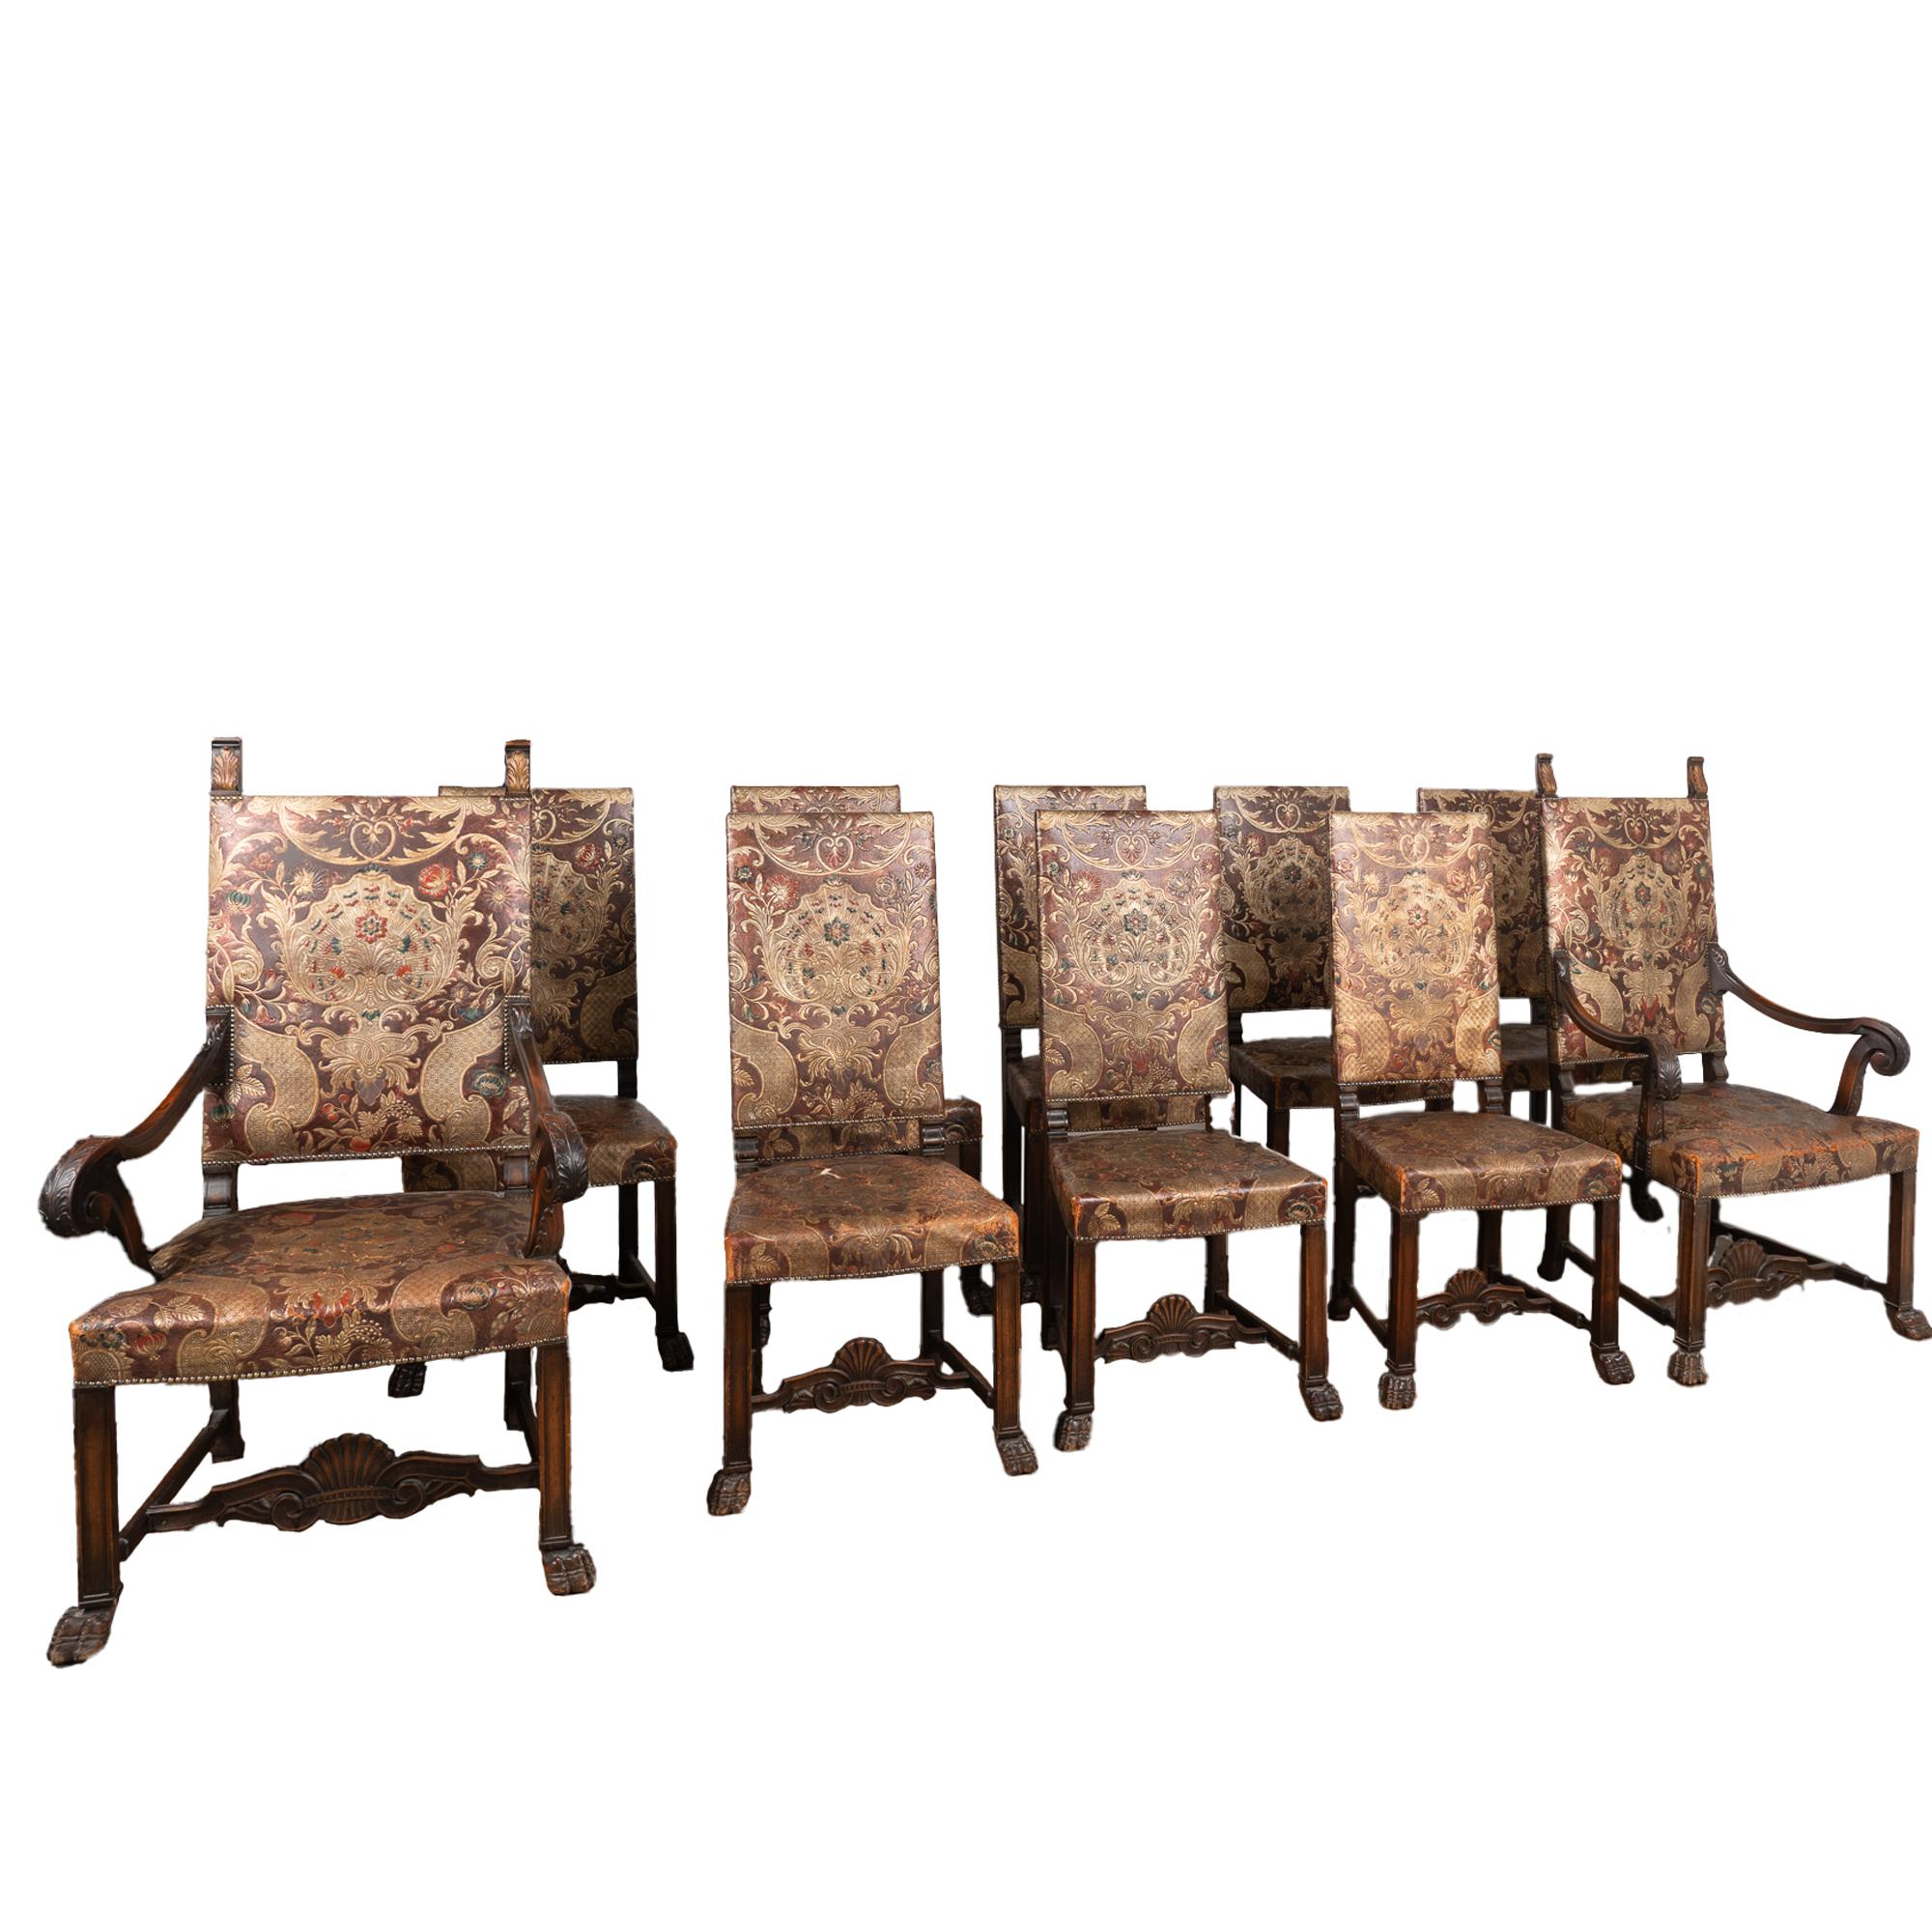 Dramatic set of 10 embossed and hand-painted leather dining chairs with carved oak feet and stretchers. Set includes 8 side chairs and 2 arm chairs. 
Elaborate details abound in each chair, with intricate embossed patterns and flourishes in the